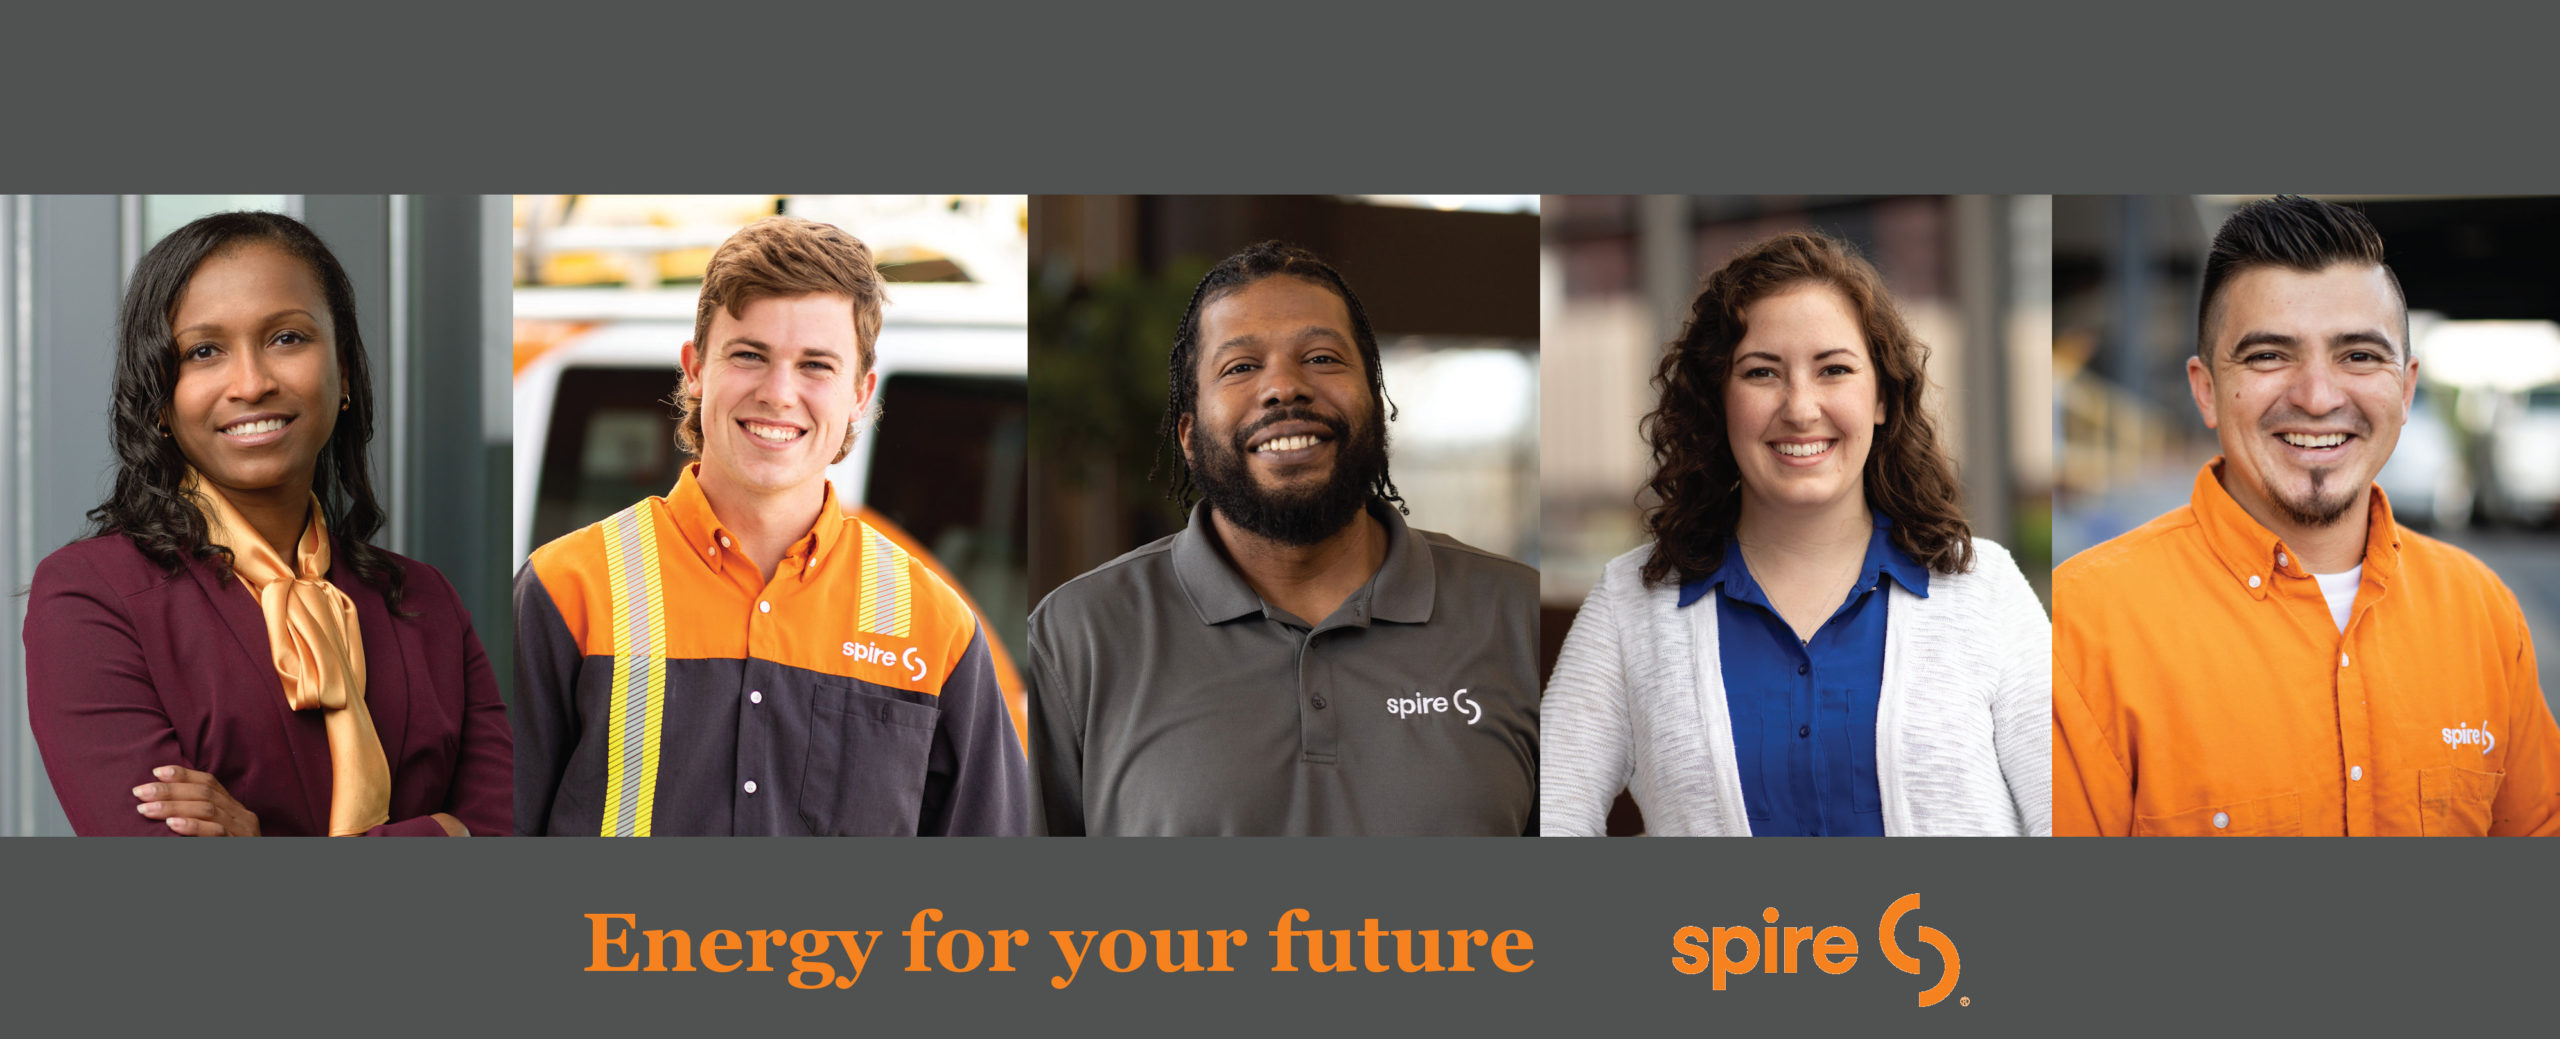 Spire Energy for your future